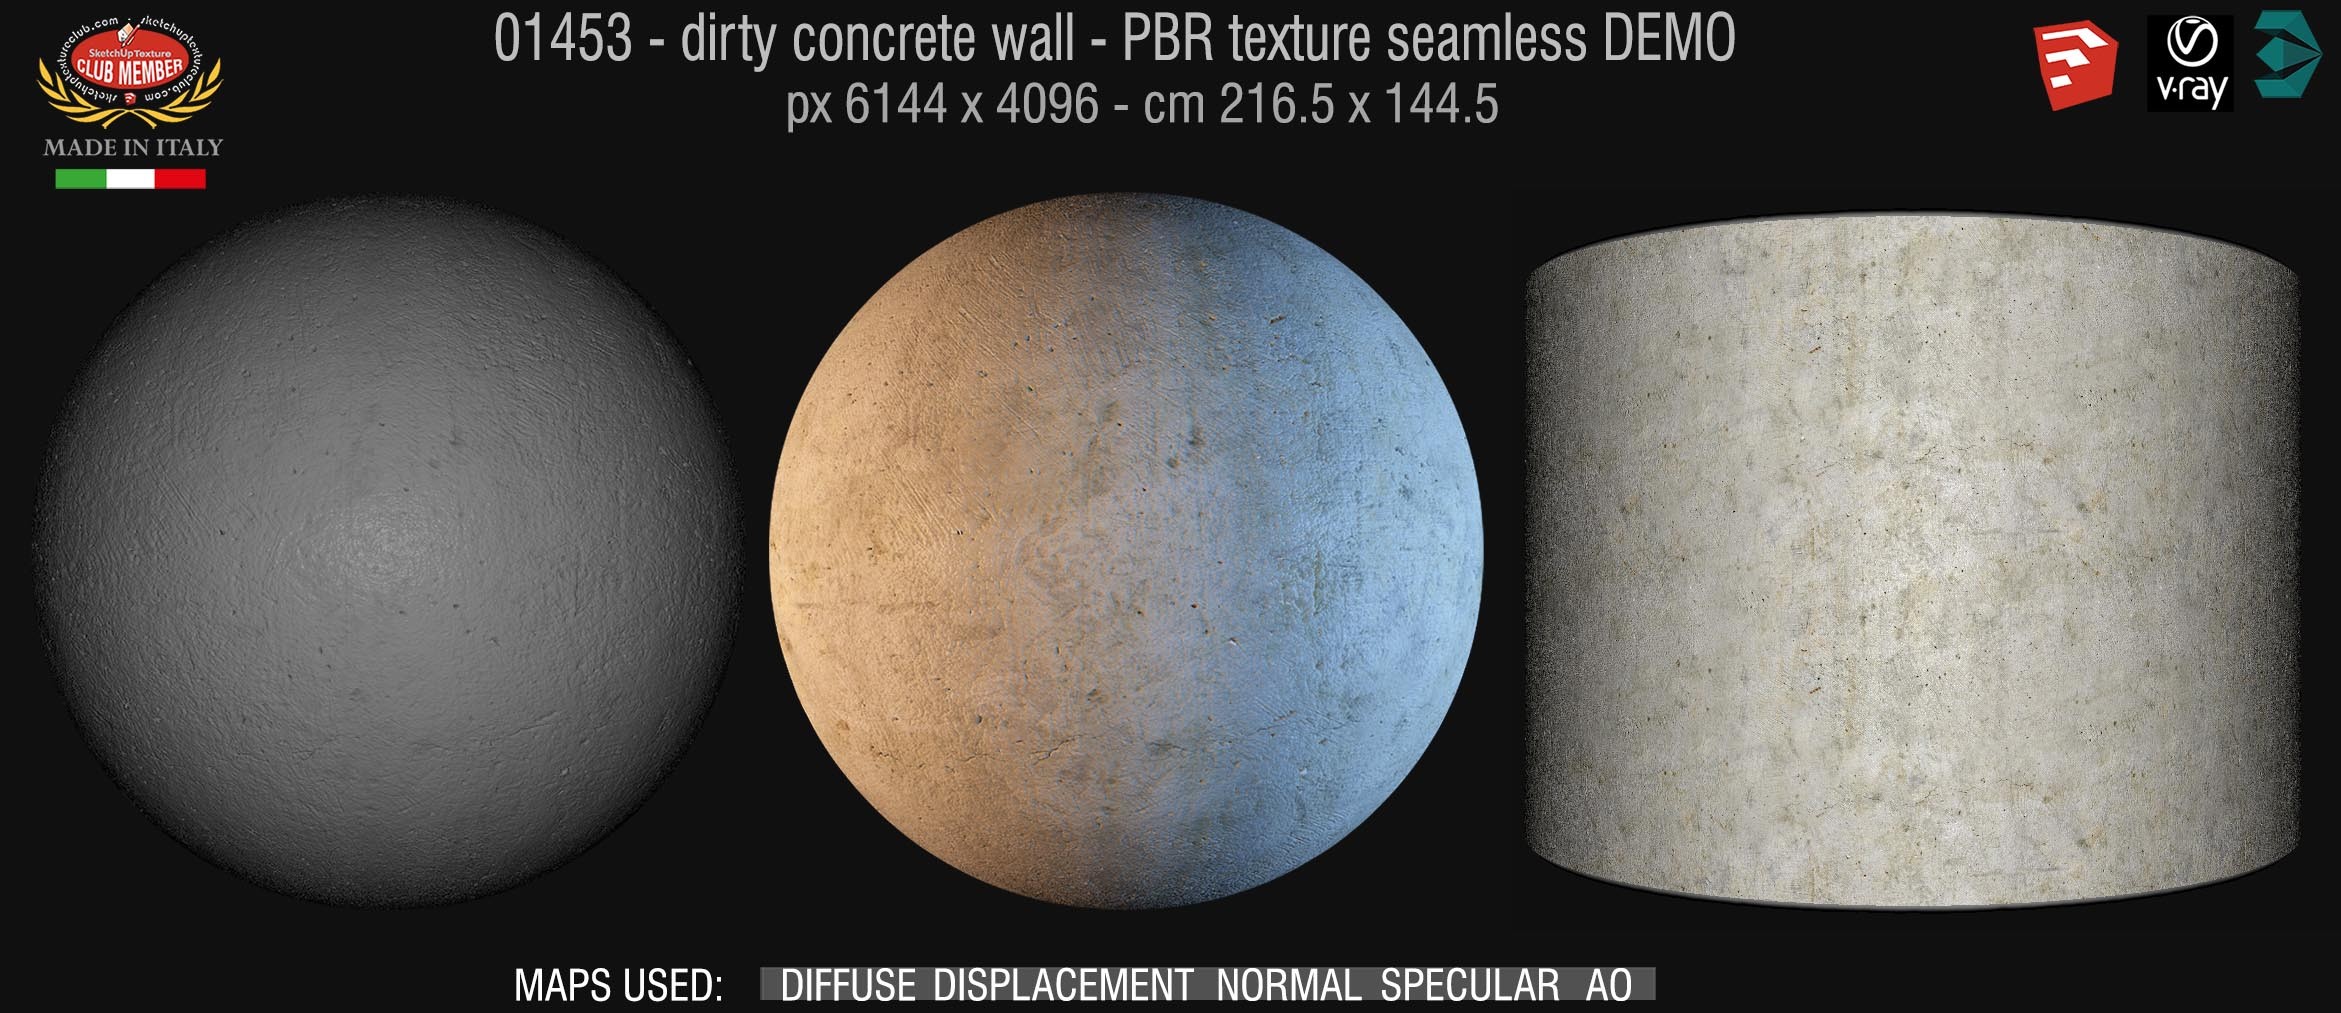 01453 Concrete bare dirty wall PBR texture seamless DEMO